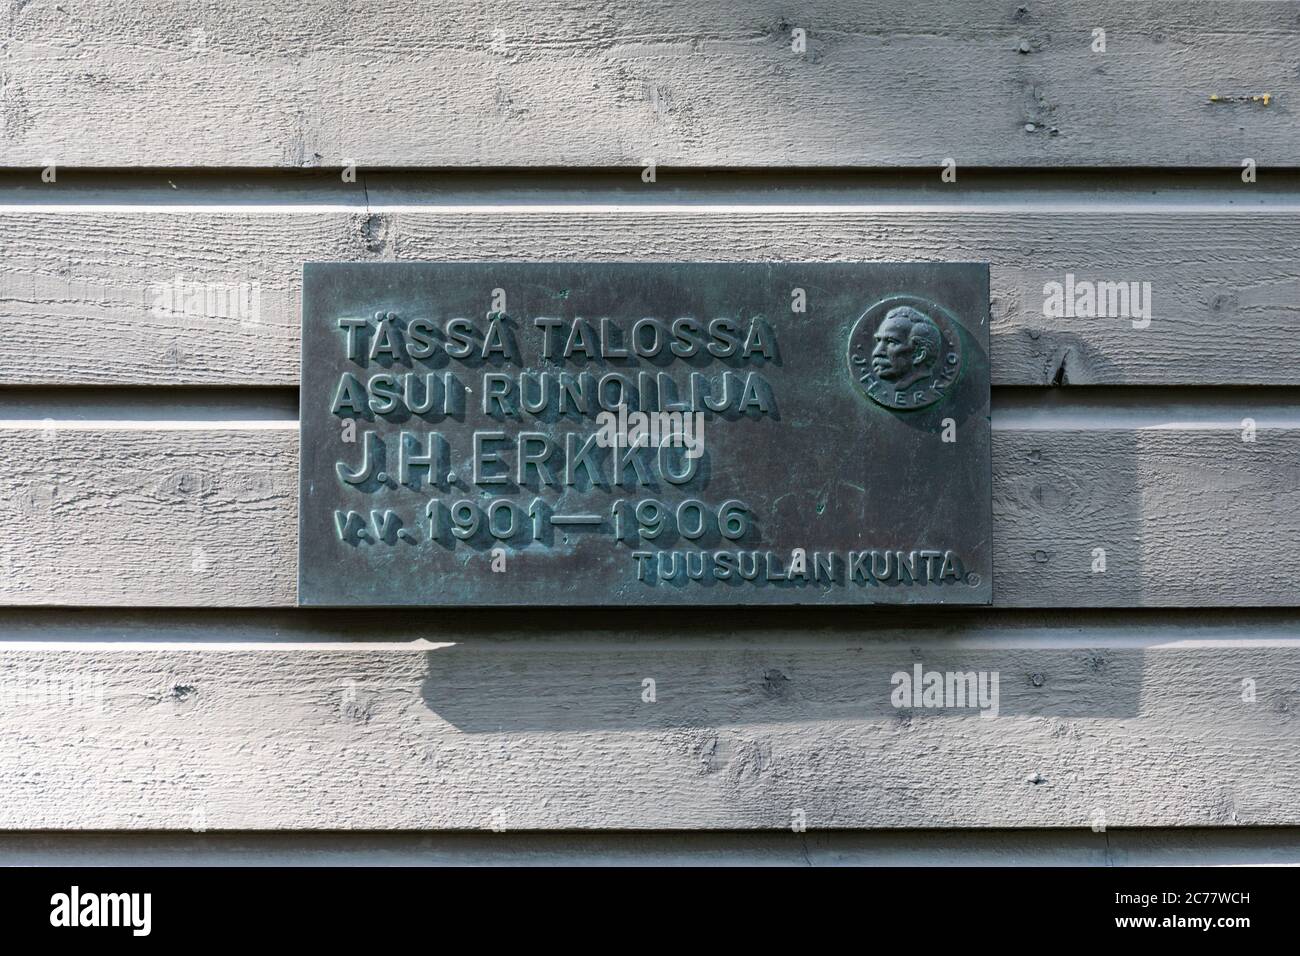 Poet J.H. Erkko lived in this house 1901-1906. Metal placard on Erkkola wall in Tuusula, Finland. Stock Photo